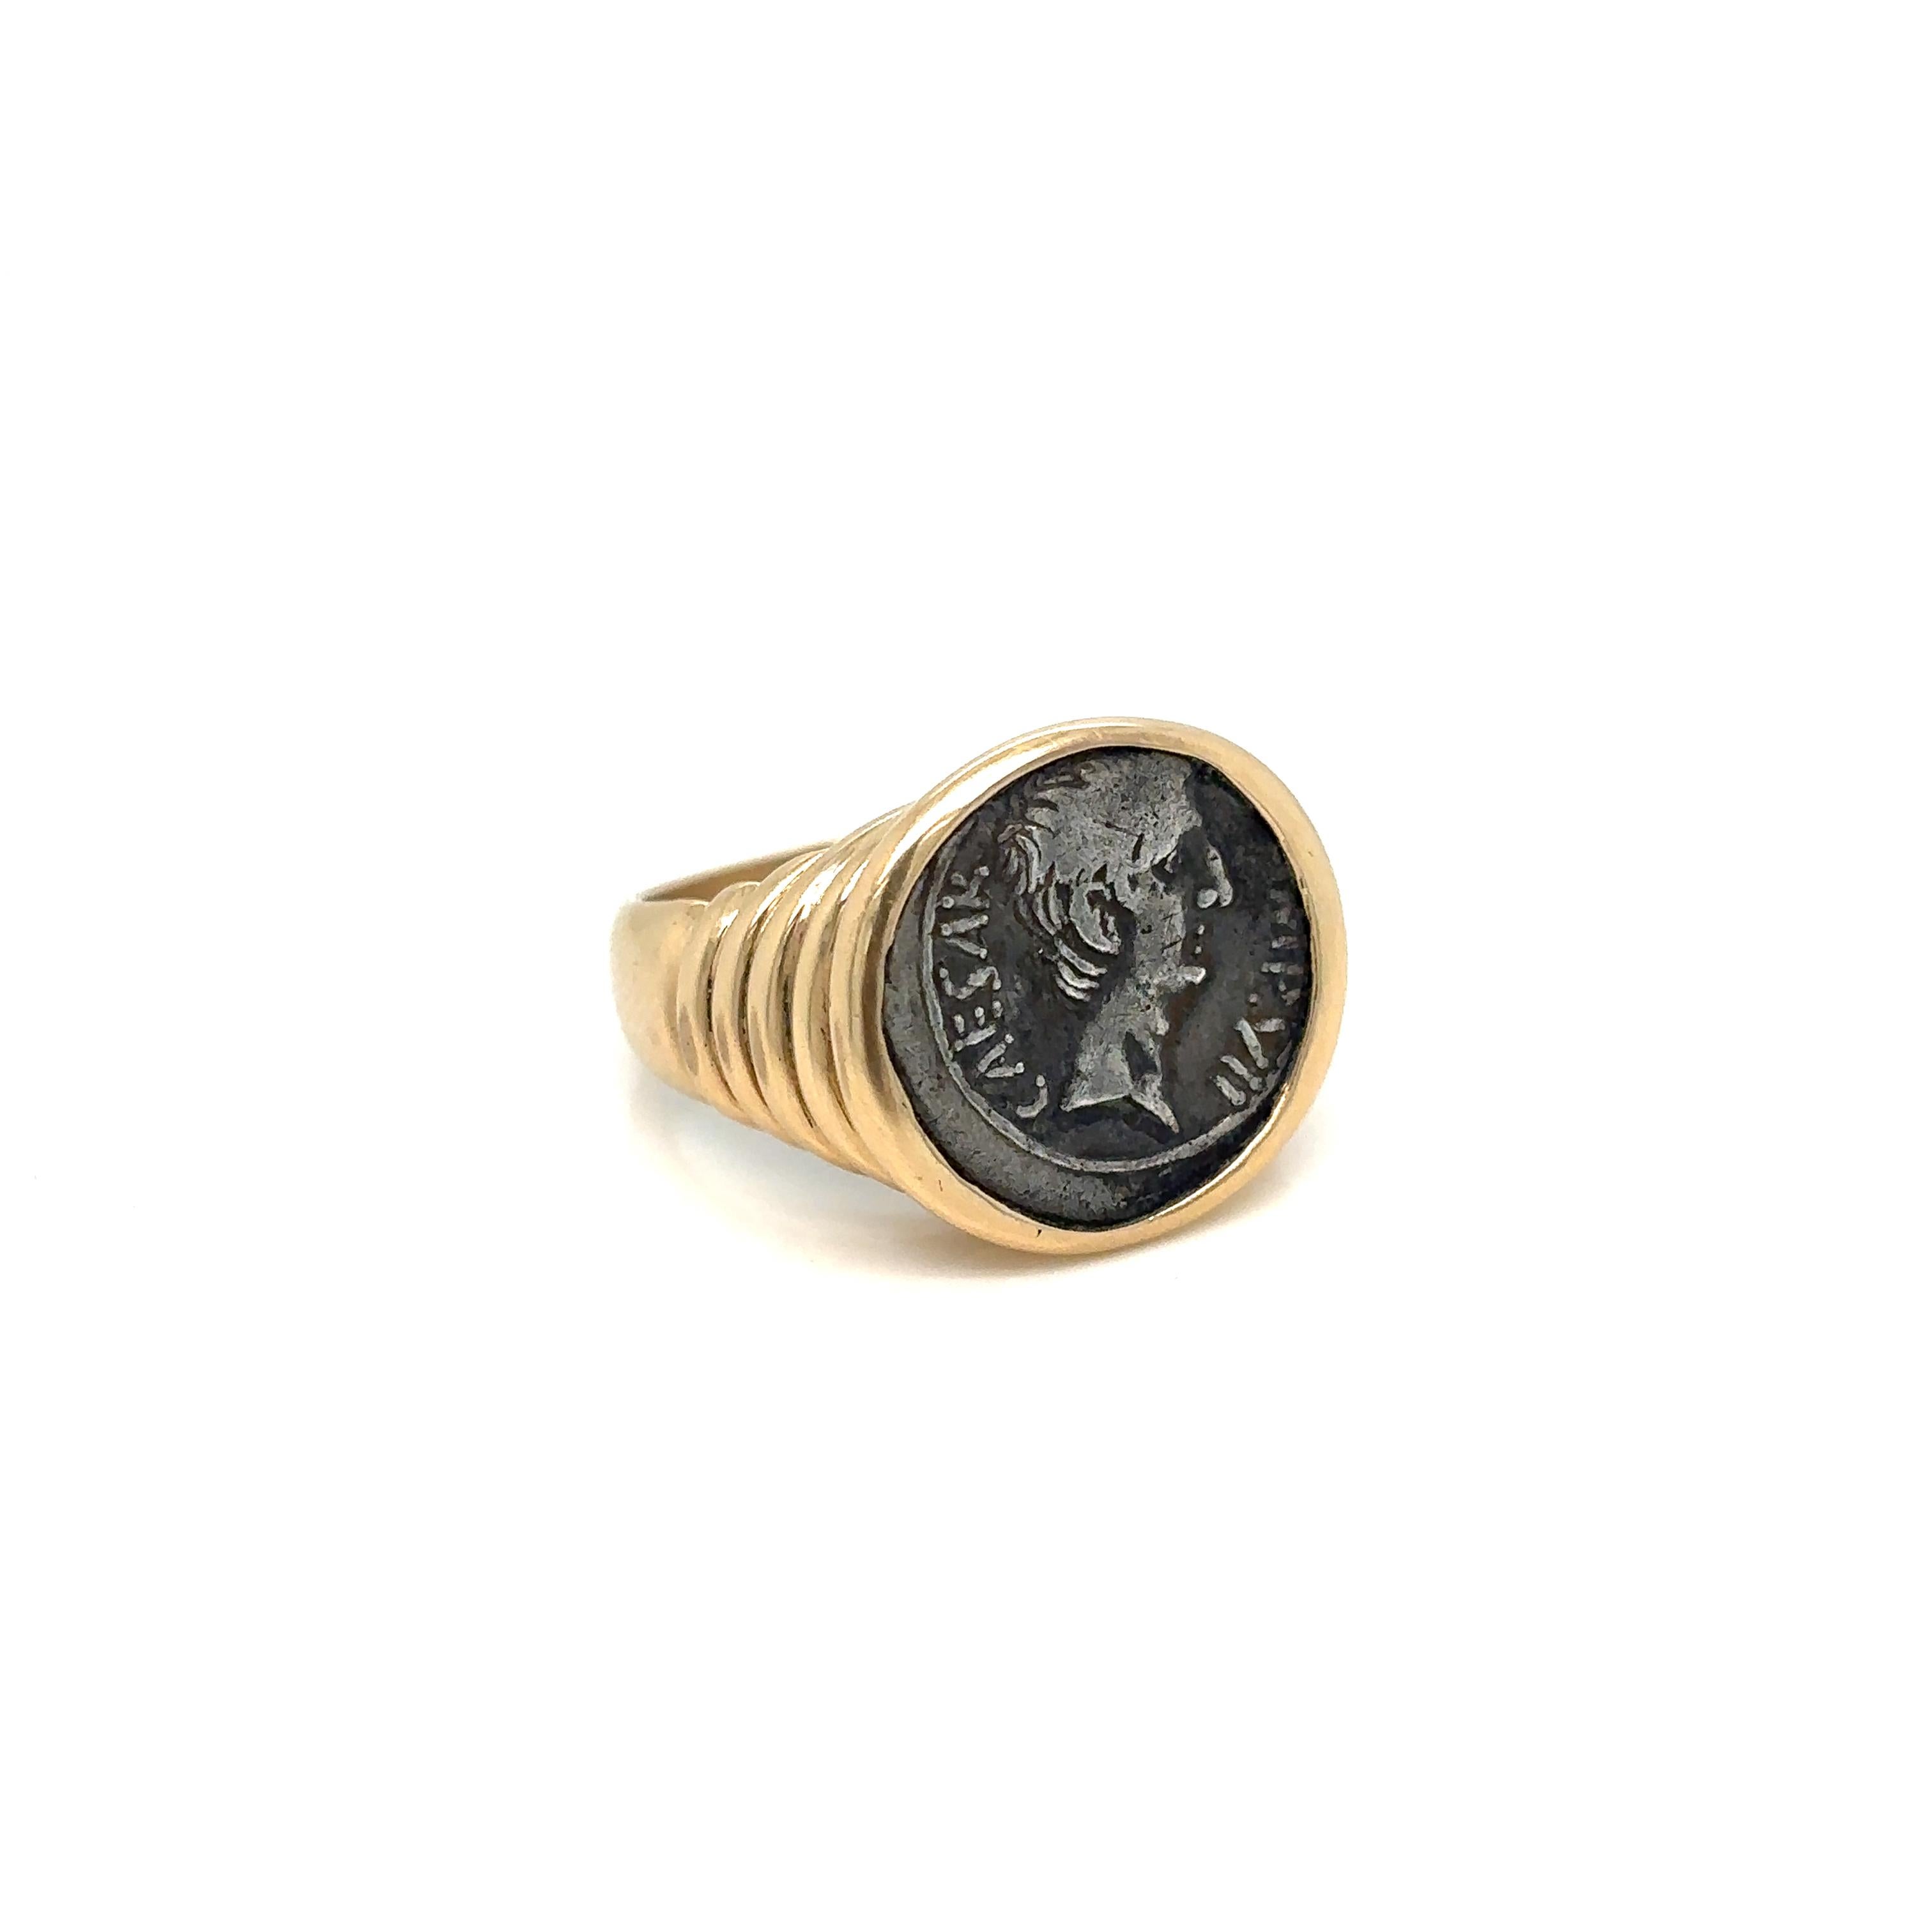 Bulgari Monete Roman Imperatorial Silver Coin Gold Ring In Excellent Condition For Sale In Napoli, Italy